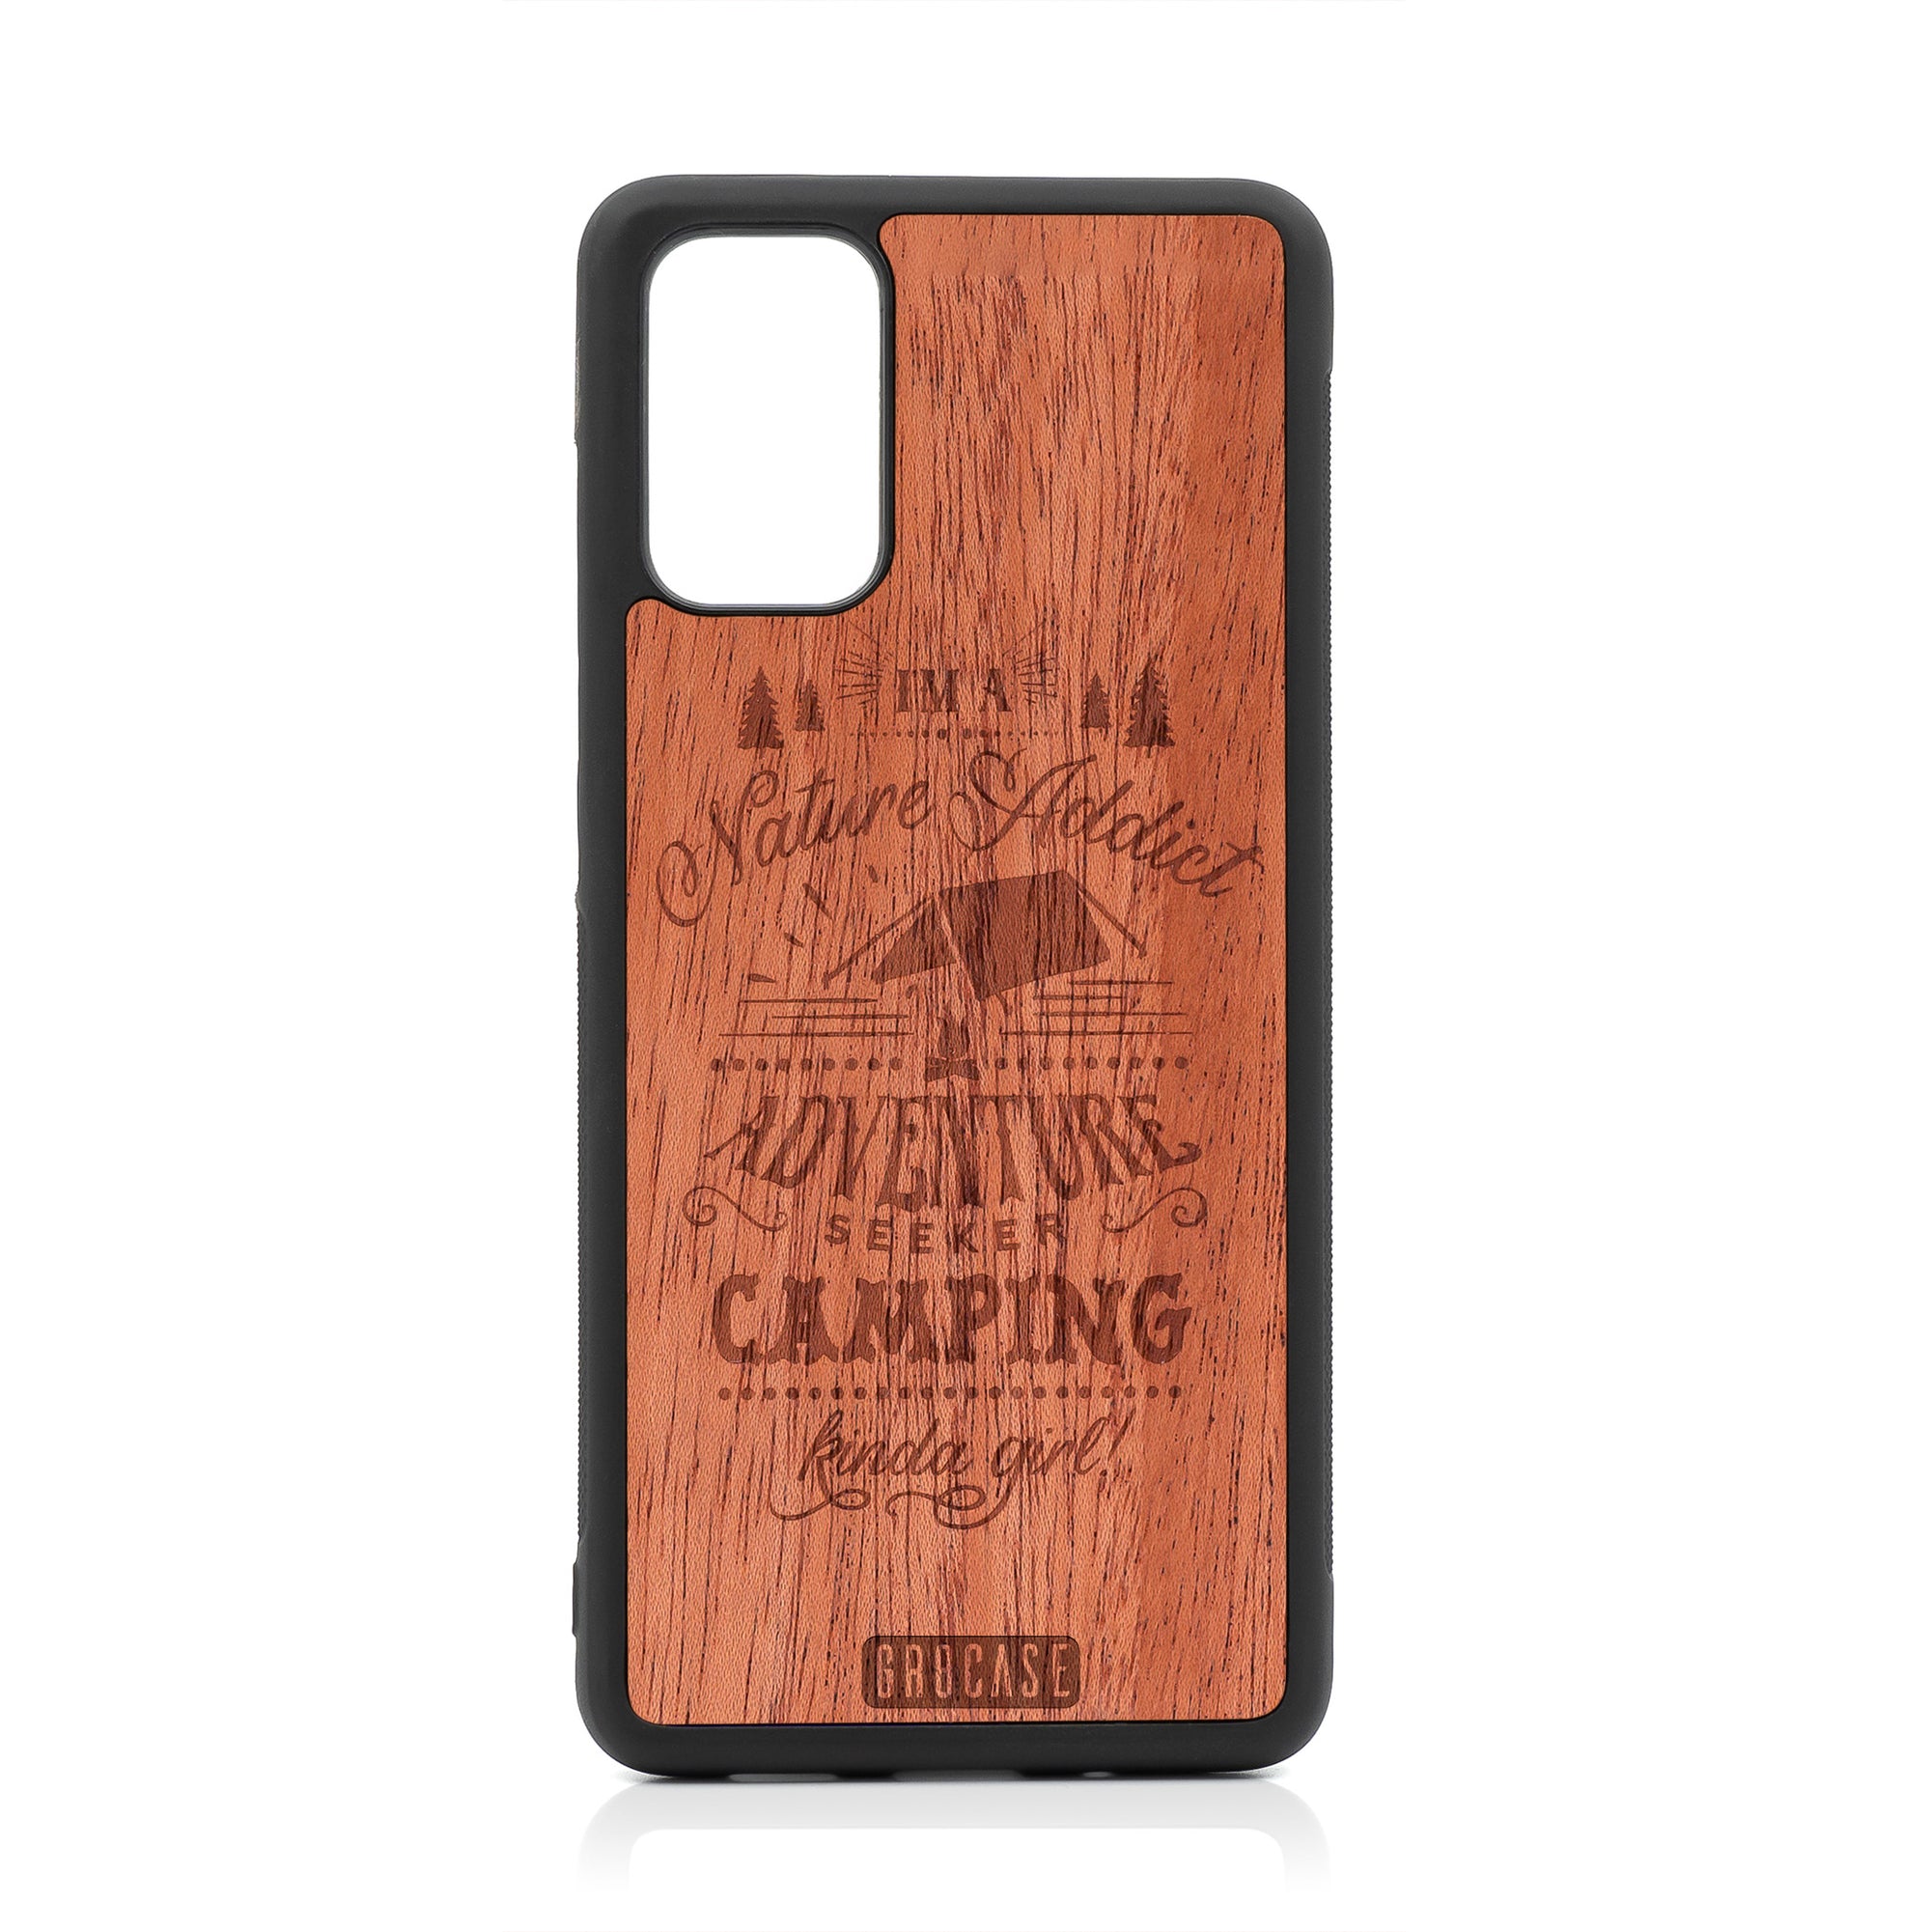 I'm A Nature Addict Adventure Seeker Camping Kinda Girl Design Wood Case For Samsung Galaxy S20 Plus by GR8CASE